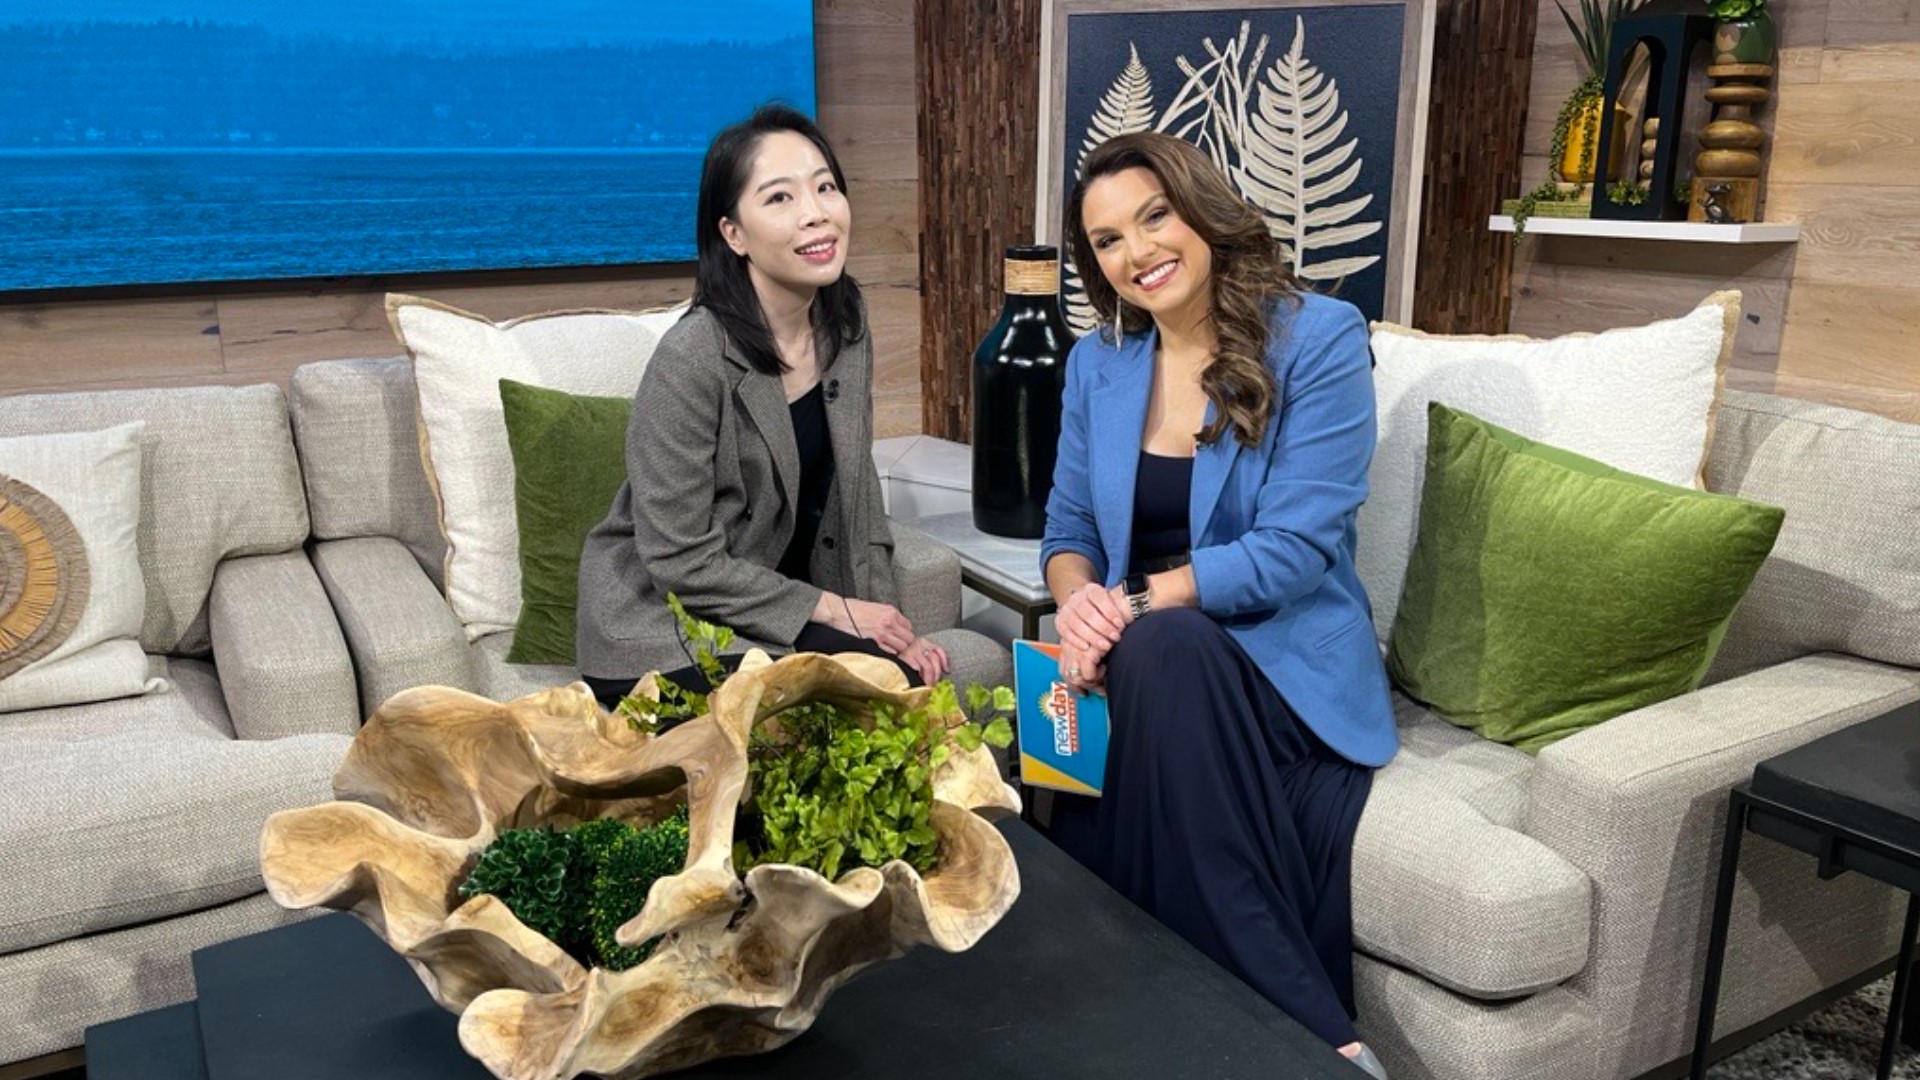 Jennifer Hong, a marketing professor at Seattle University, breaks down the good, the bad and the mixed bags of Super Bowl commercials. #newdaynw